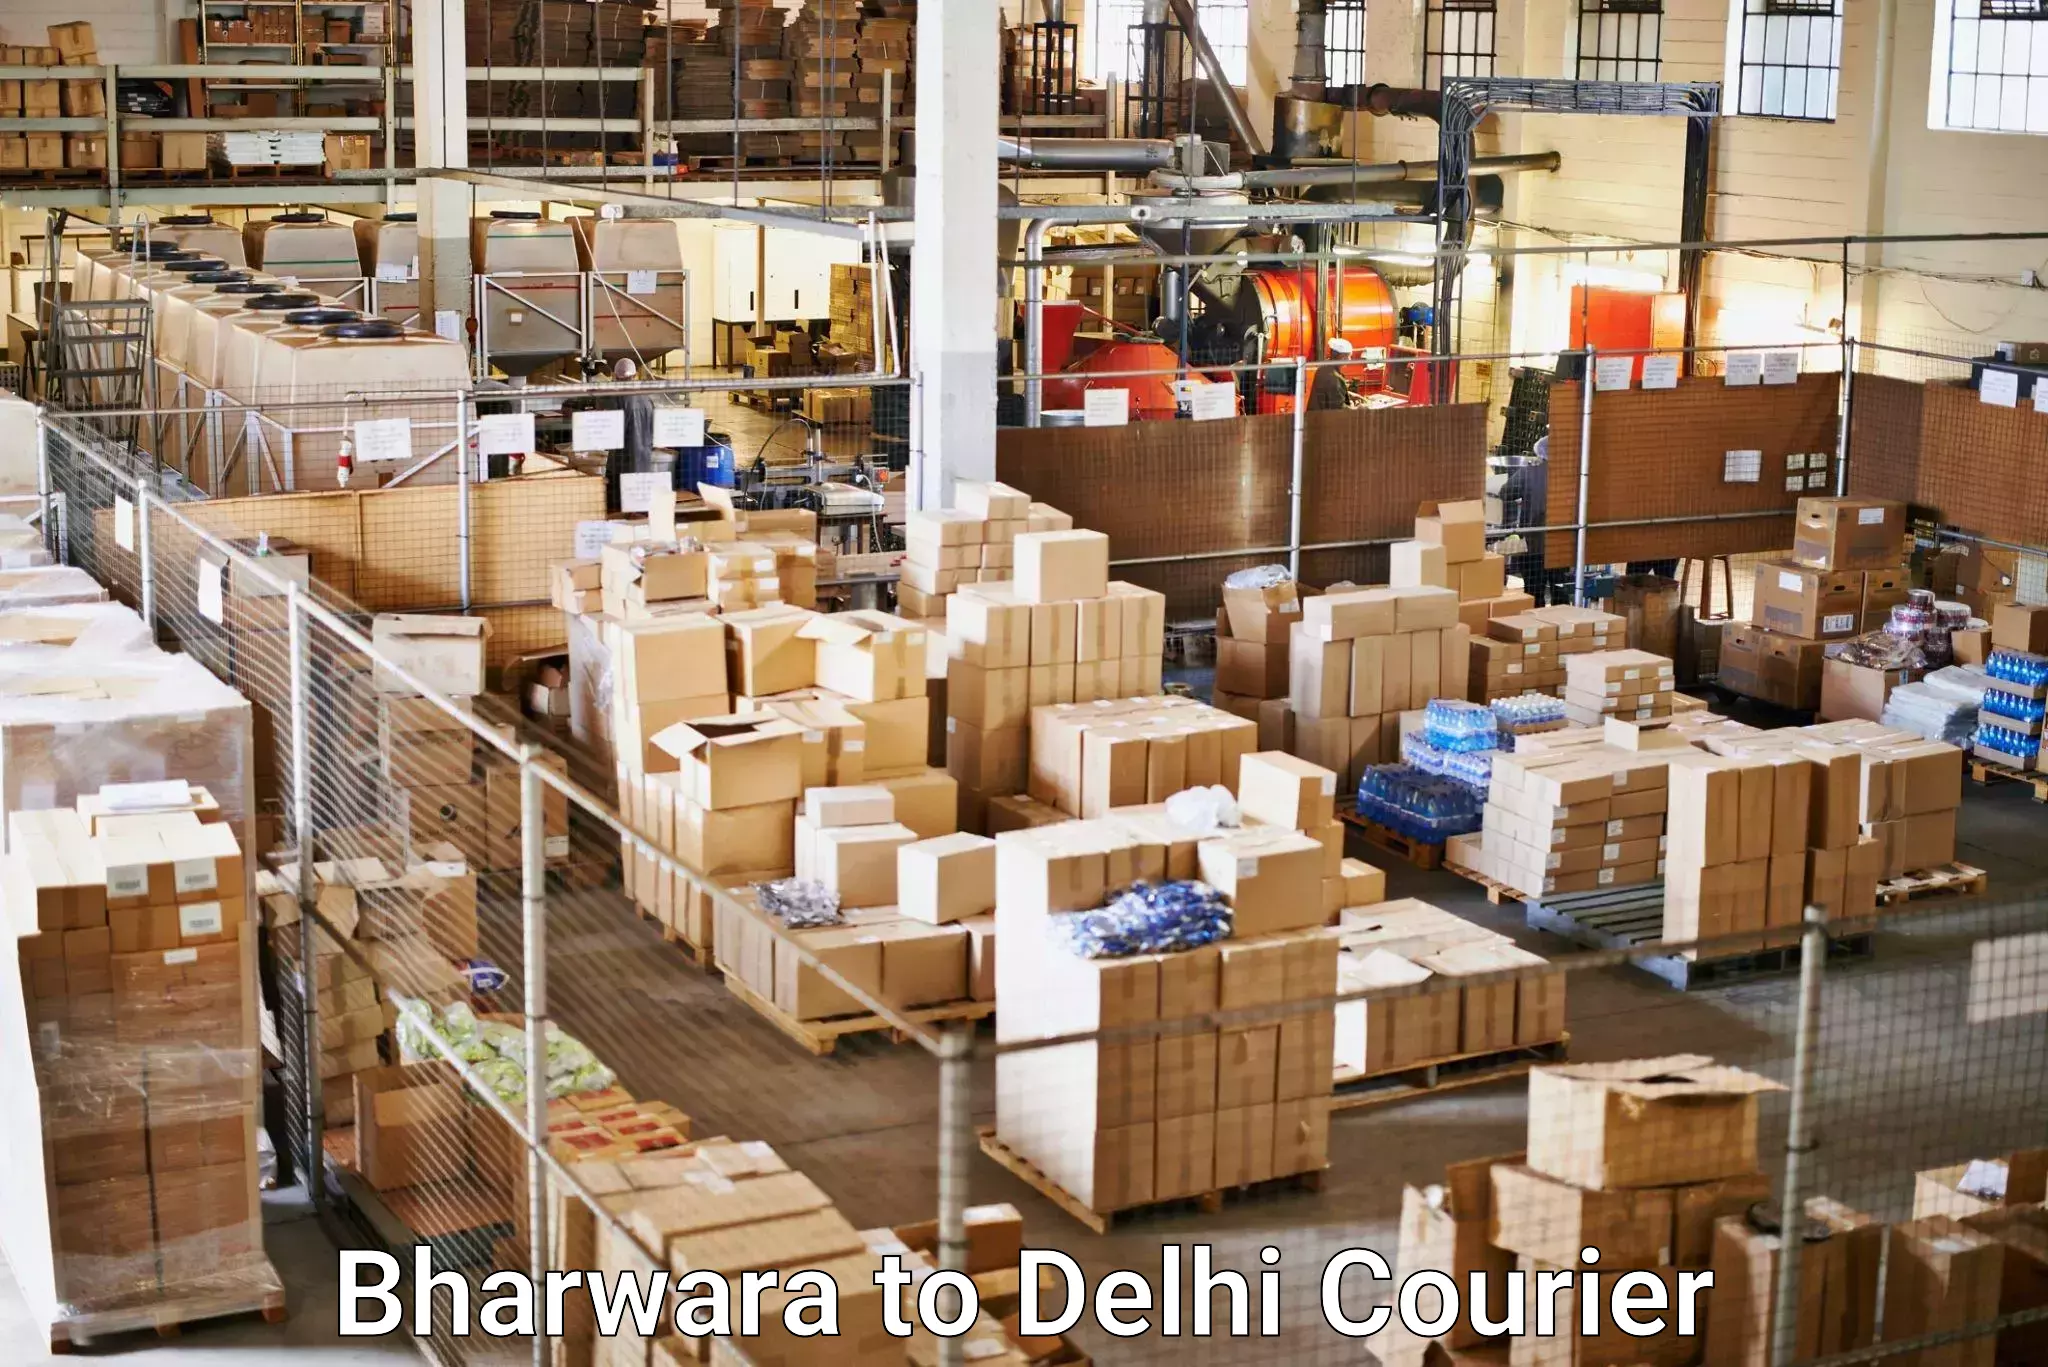 Overnight delivery services Bharwara to Delhi